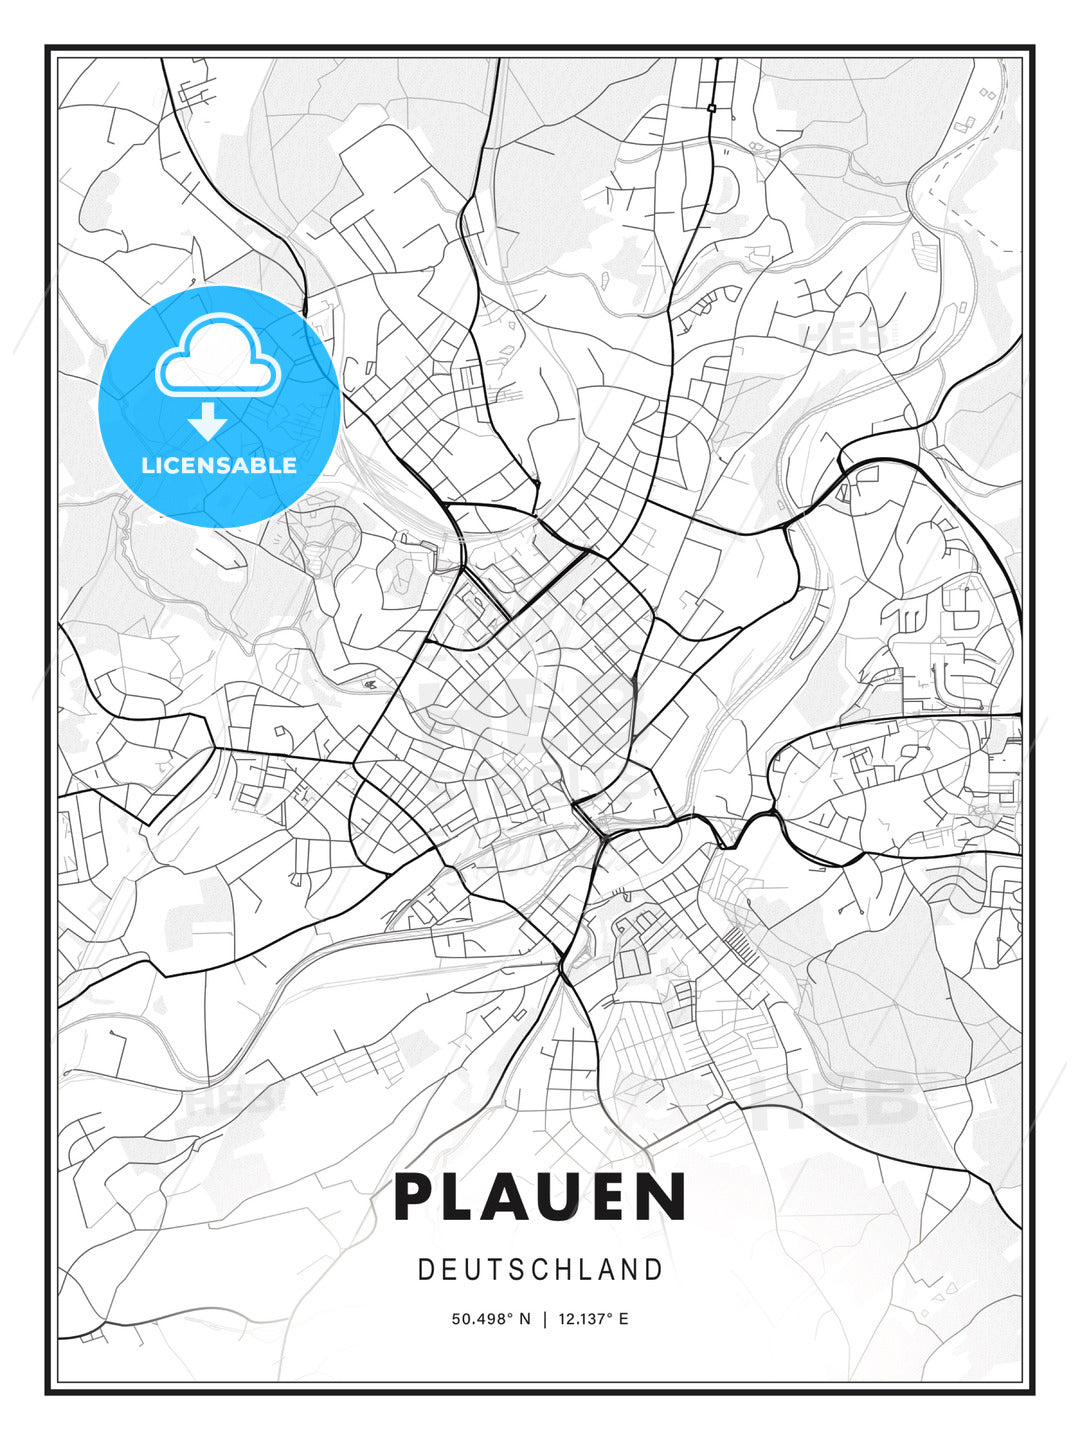 Plauen, Germany, Modern Print Template in Various Formats - HEBSTREITS Sketches